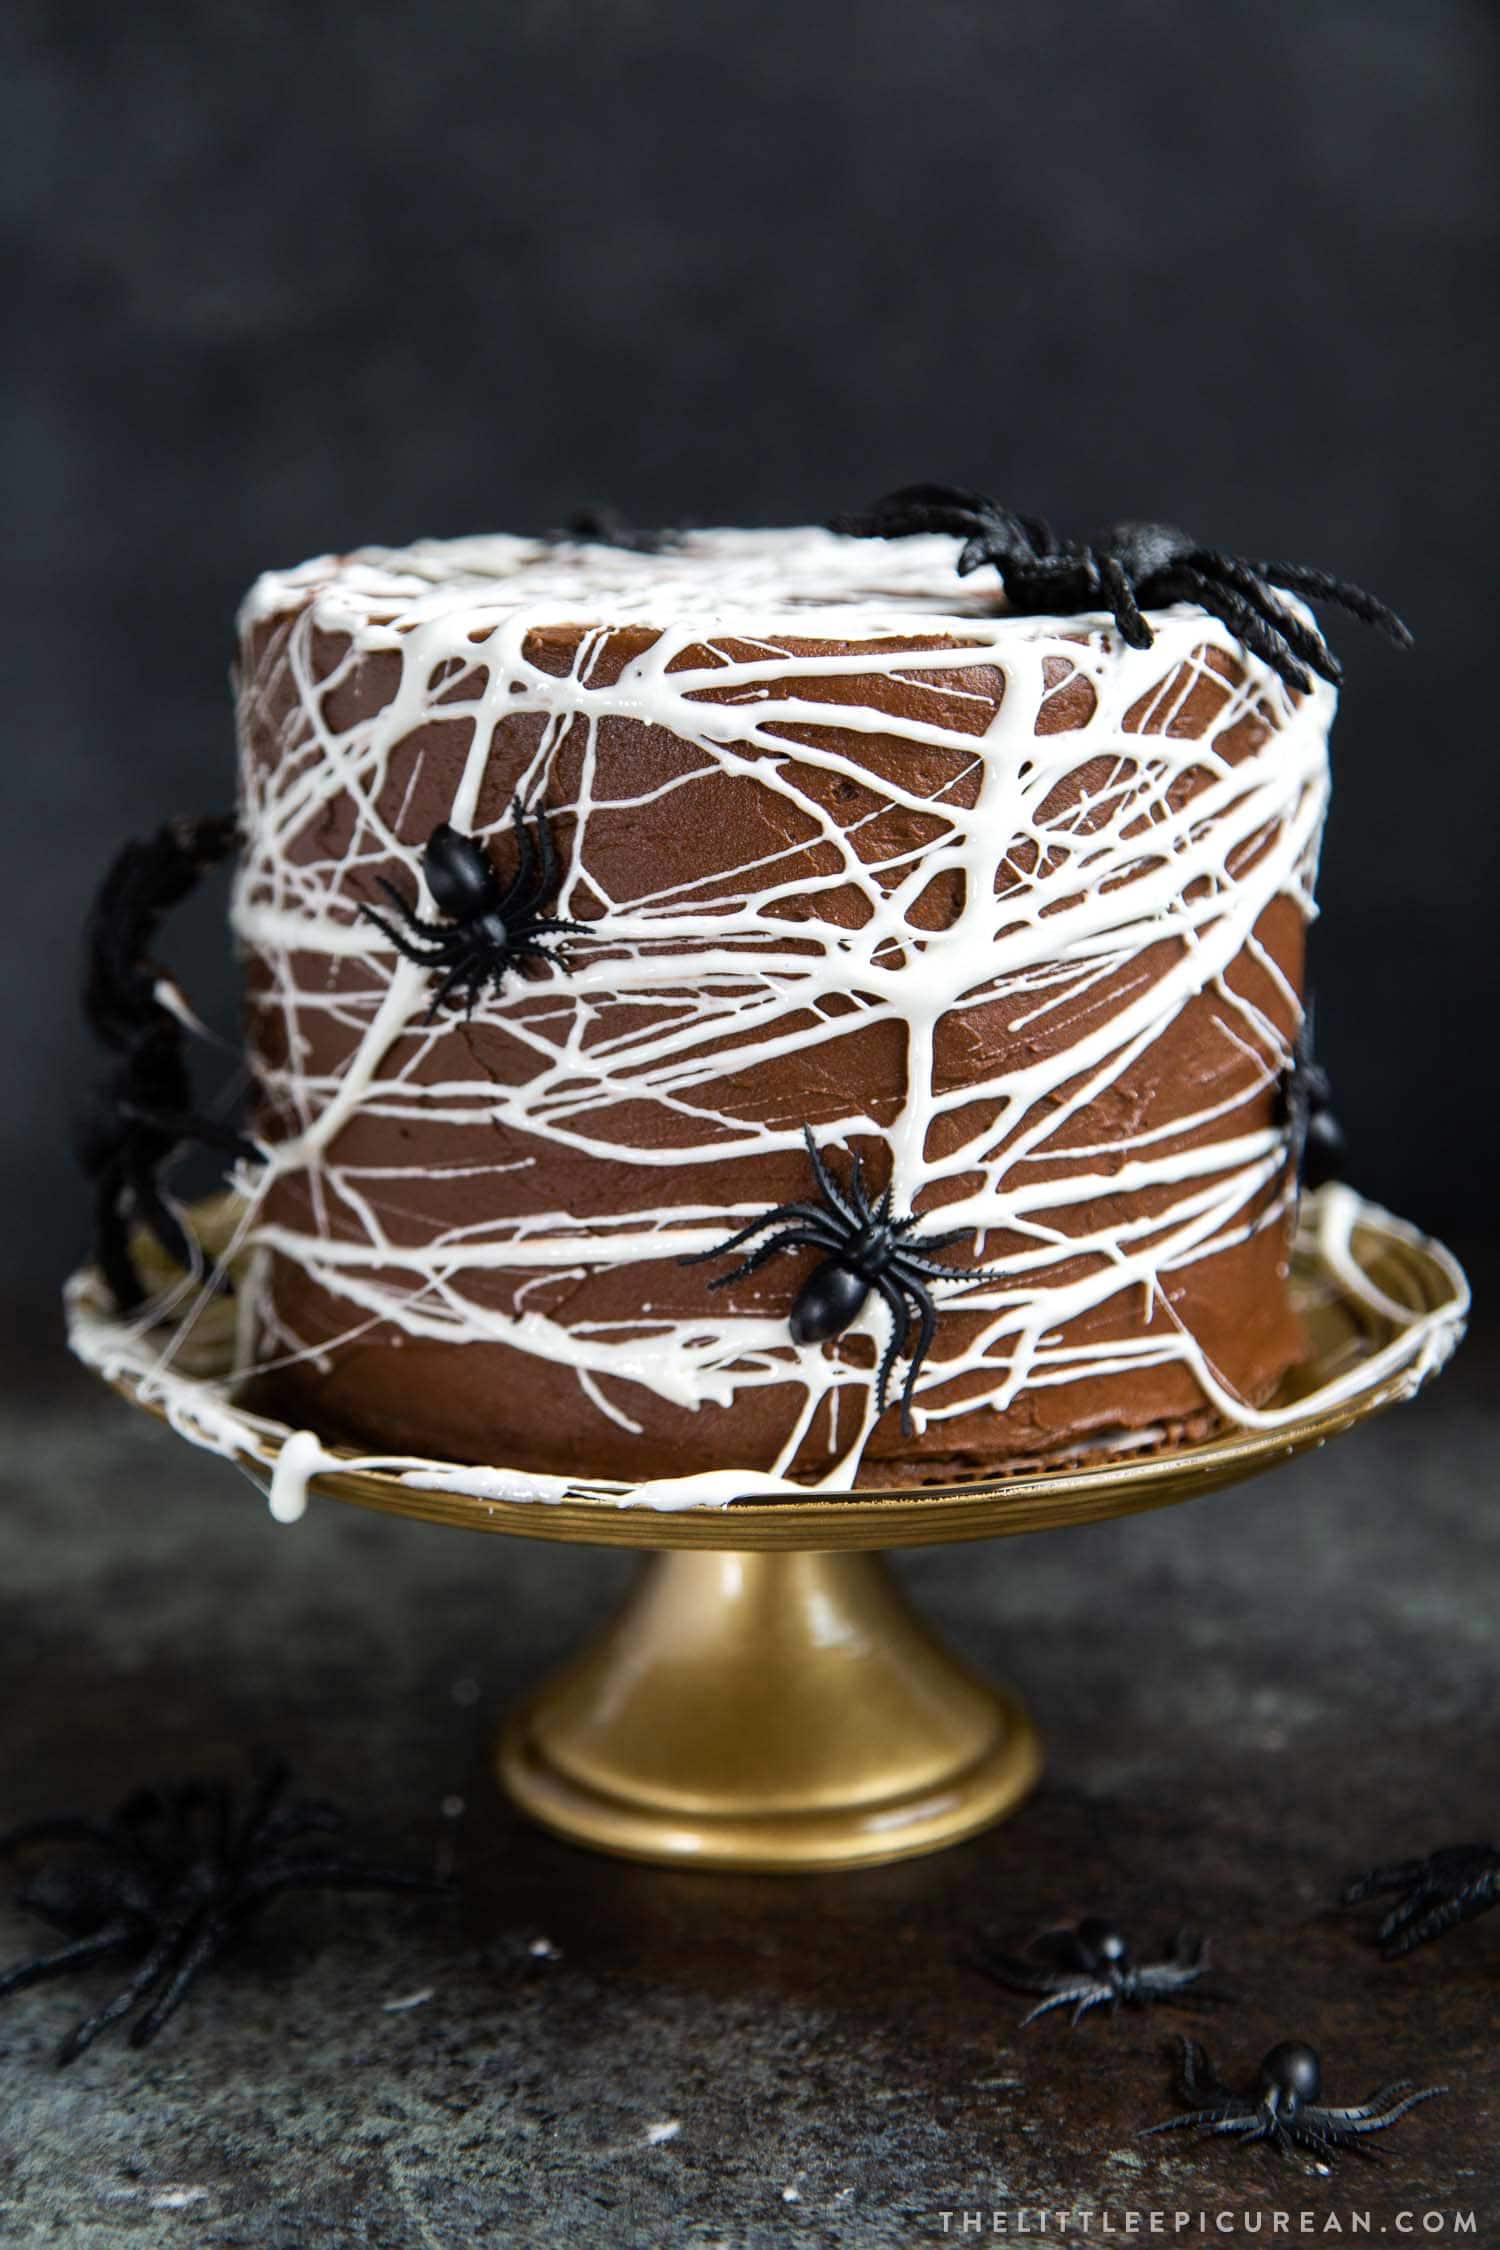 How to Make Spider Web on Cake 